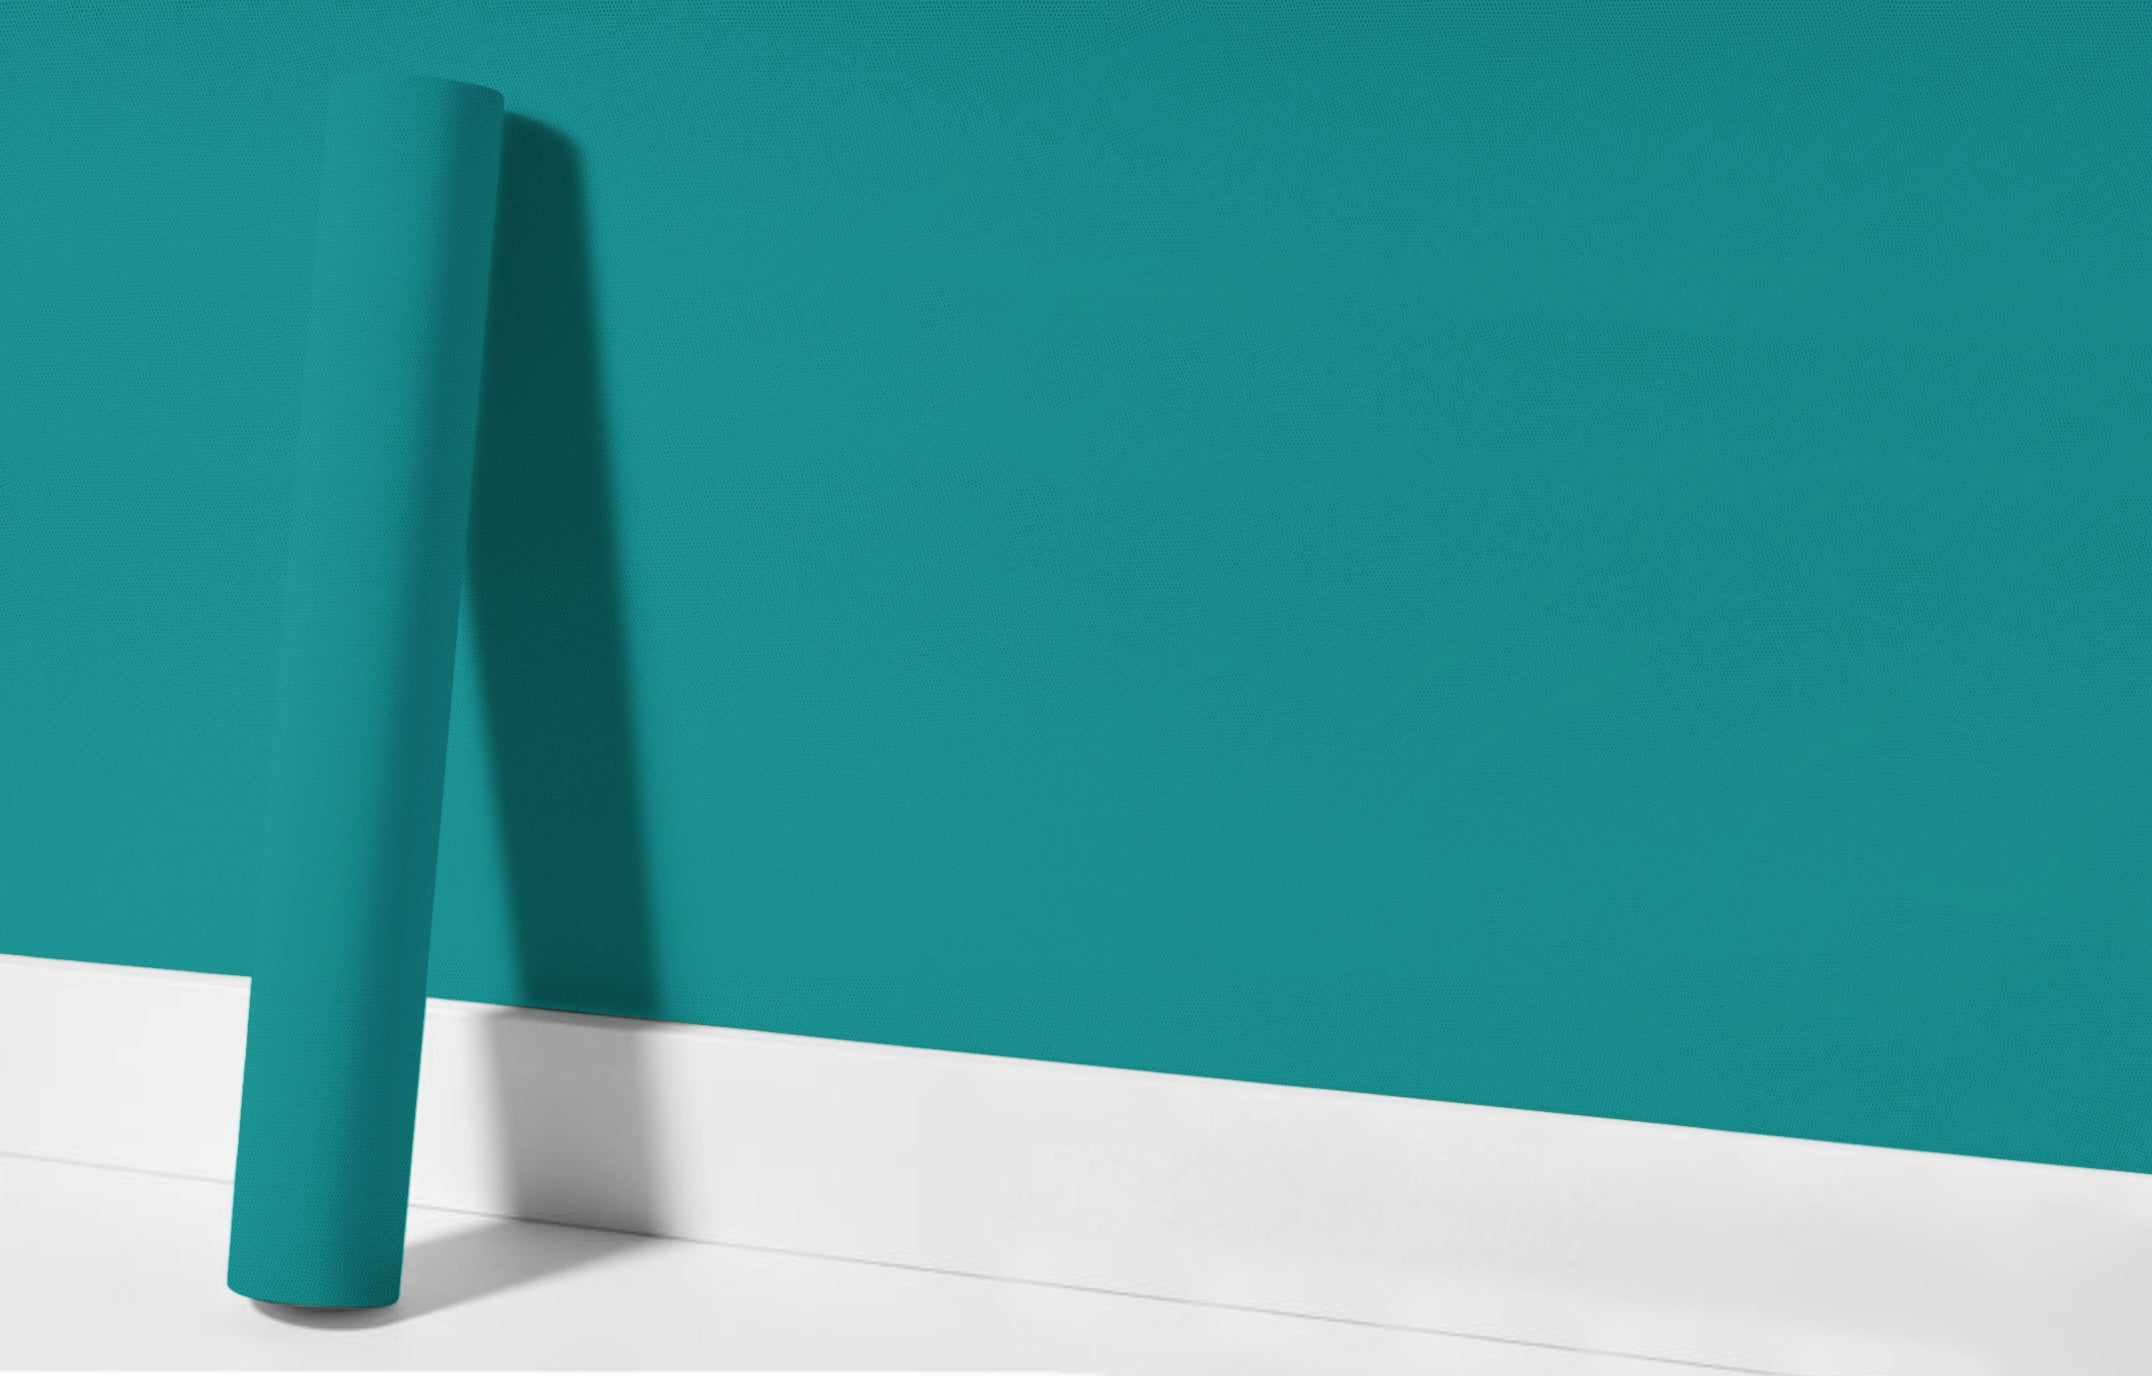 Peel & Stick Removable Re-usable Paint - Color RAL 5018 Turquoise Blue - offRAL™ - RALRAW LLC, USA